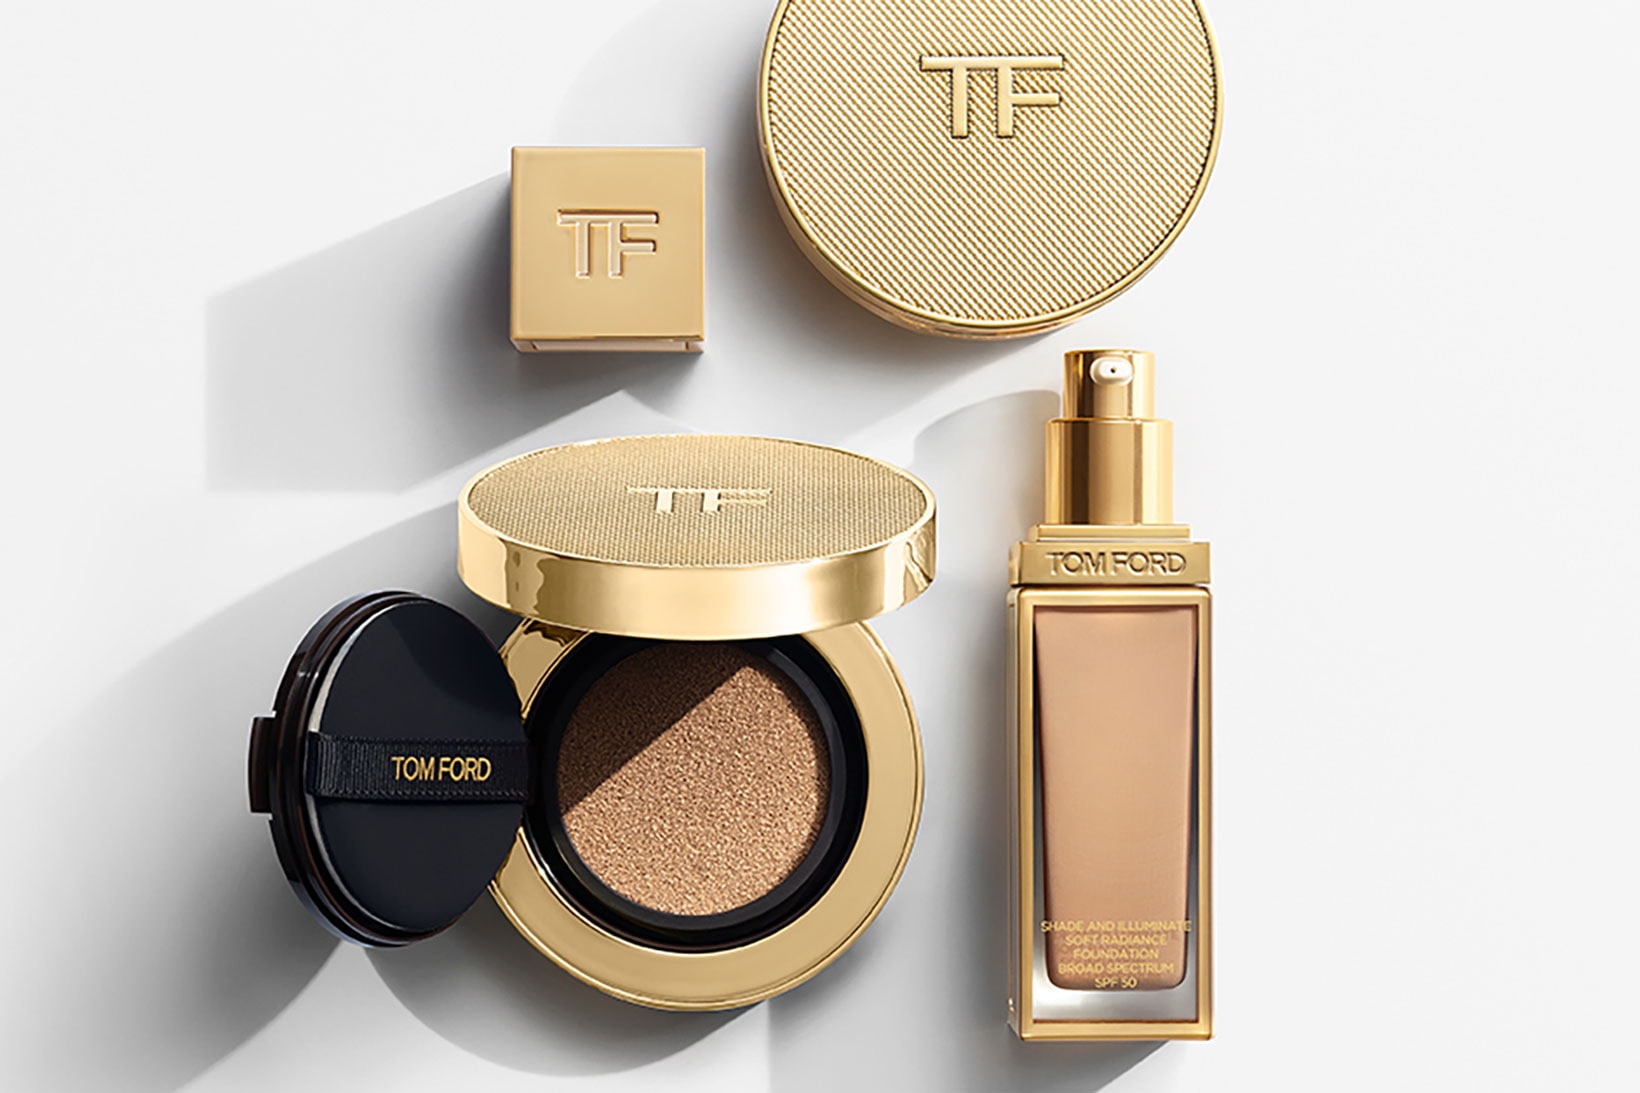 tom ford foundation cushion compact spf50 makeup beauty gold